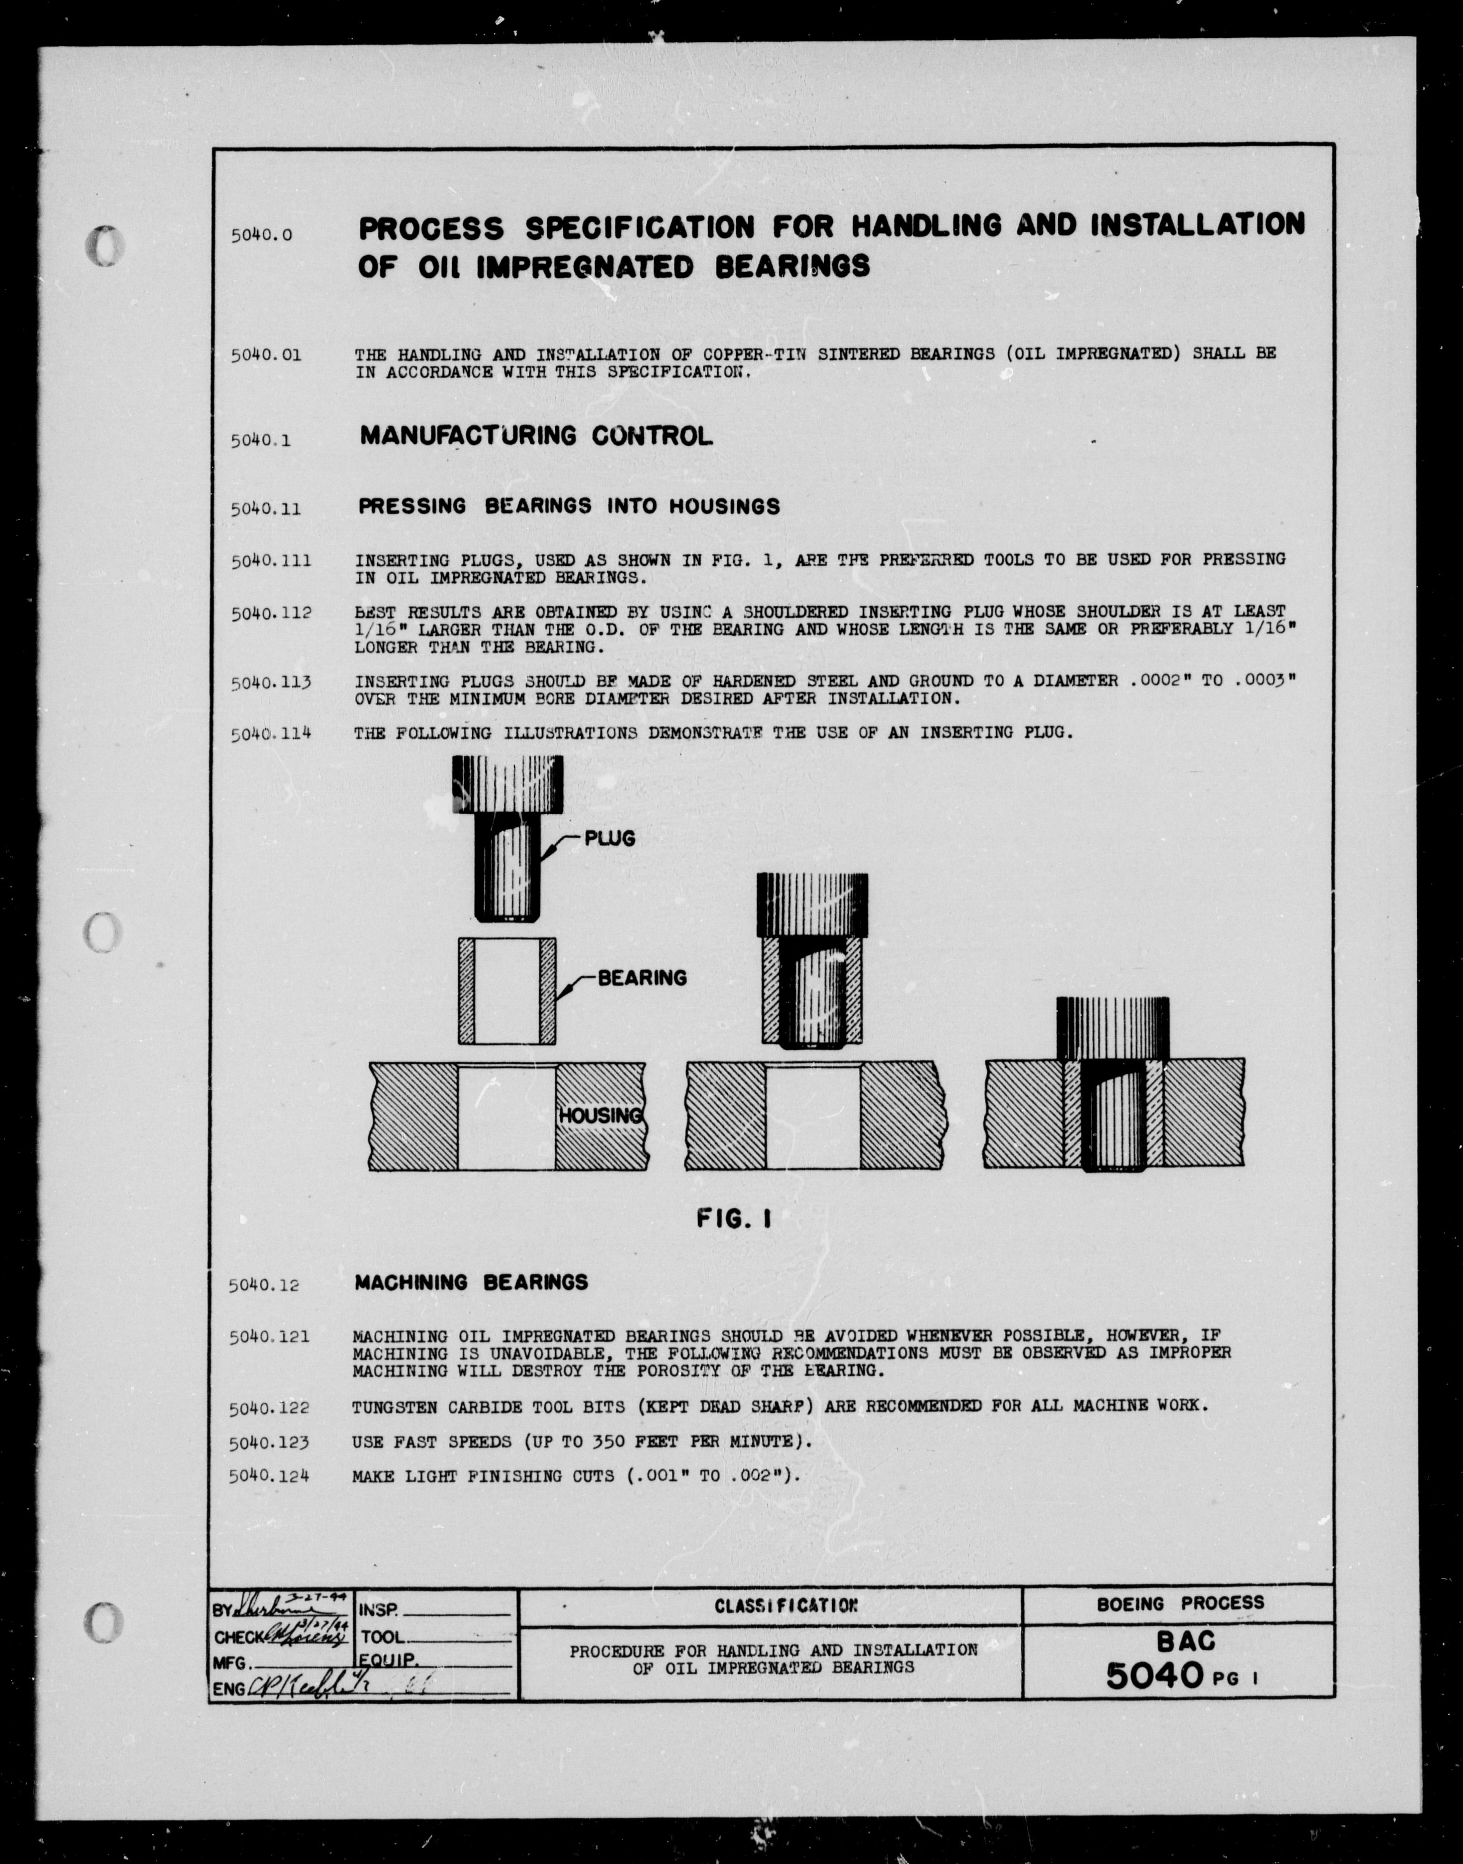 Sample page 1 from AirCorps Library document: Procedure for Handling and Installation of Oil Impregnated Bearings